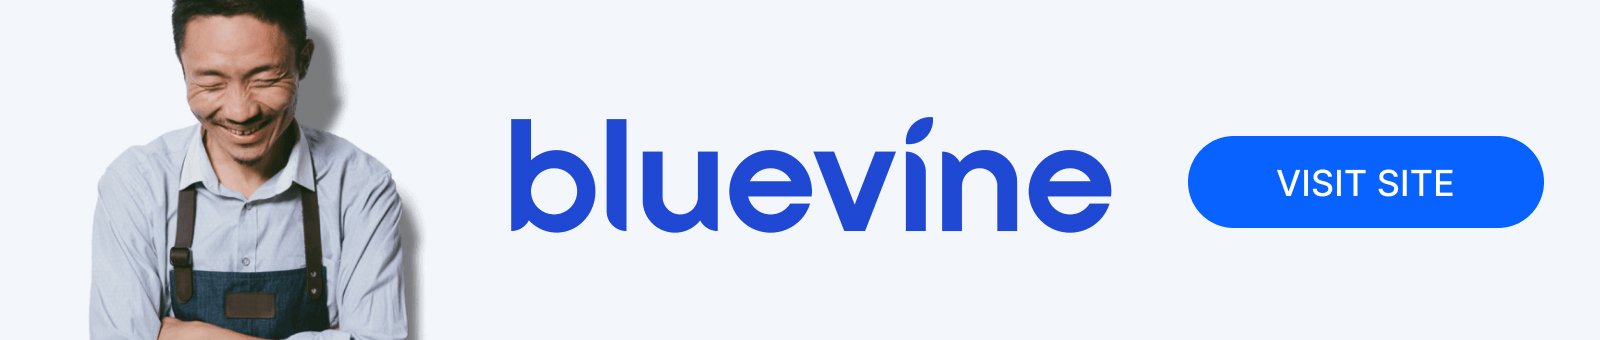 bluevine line of credit review